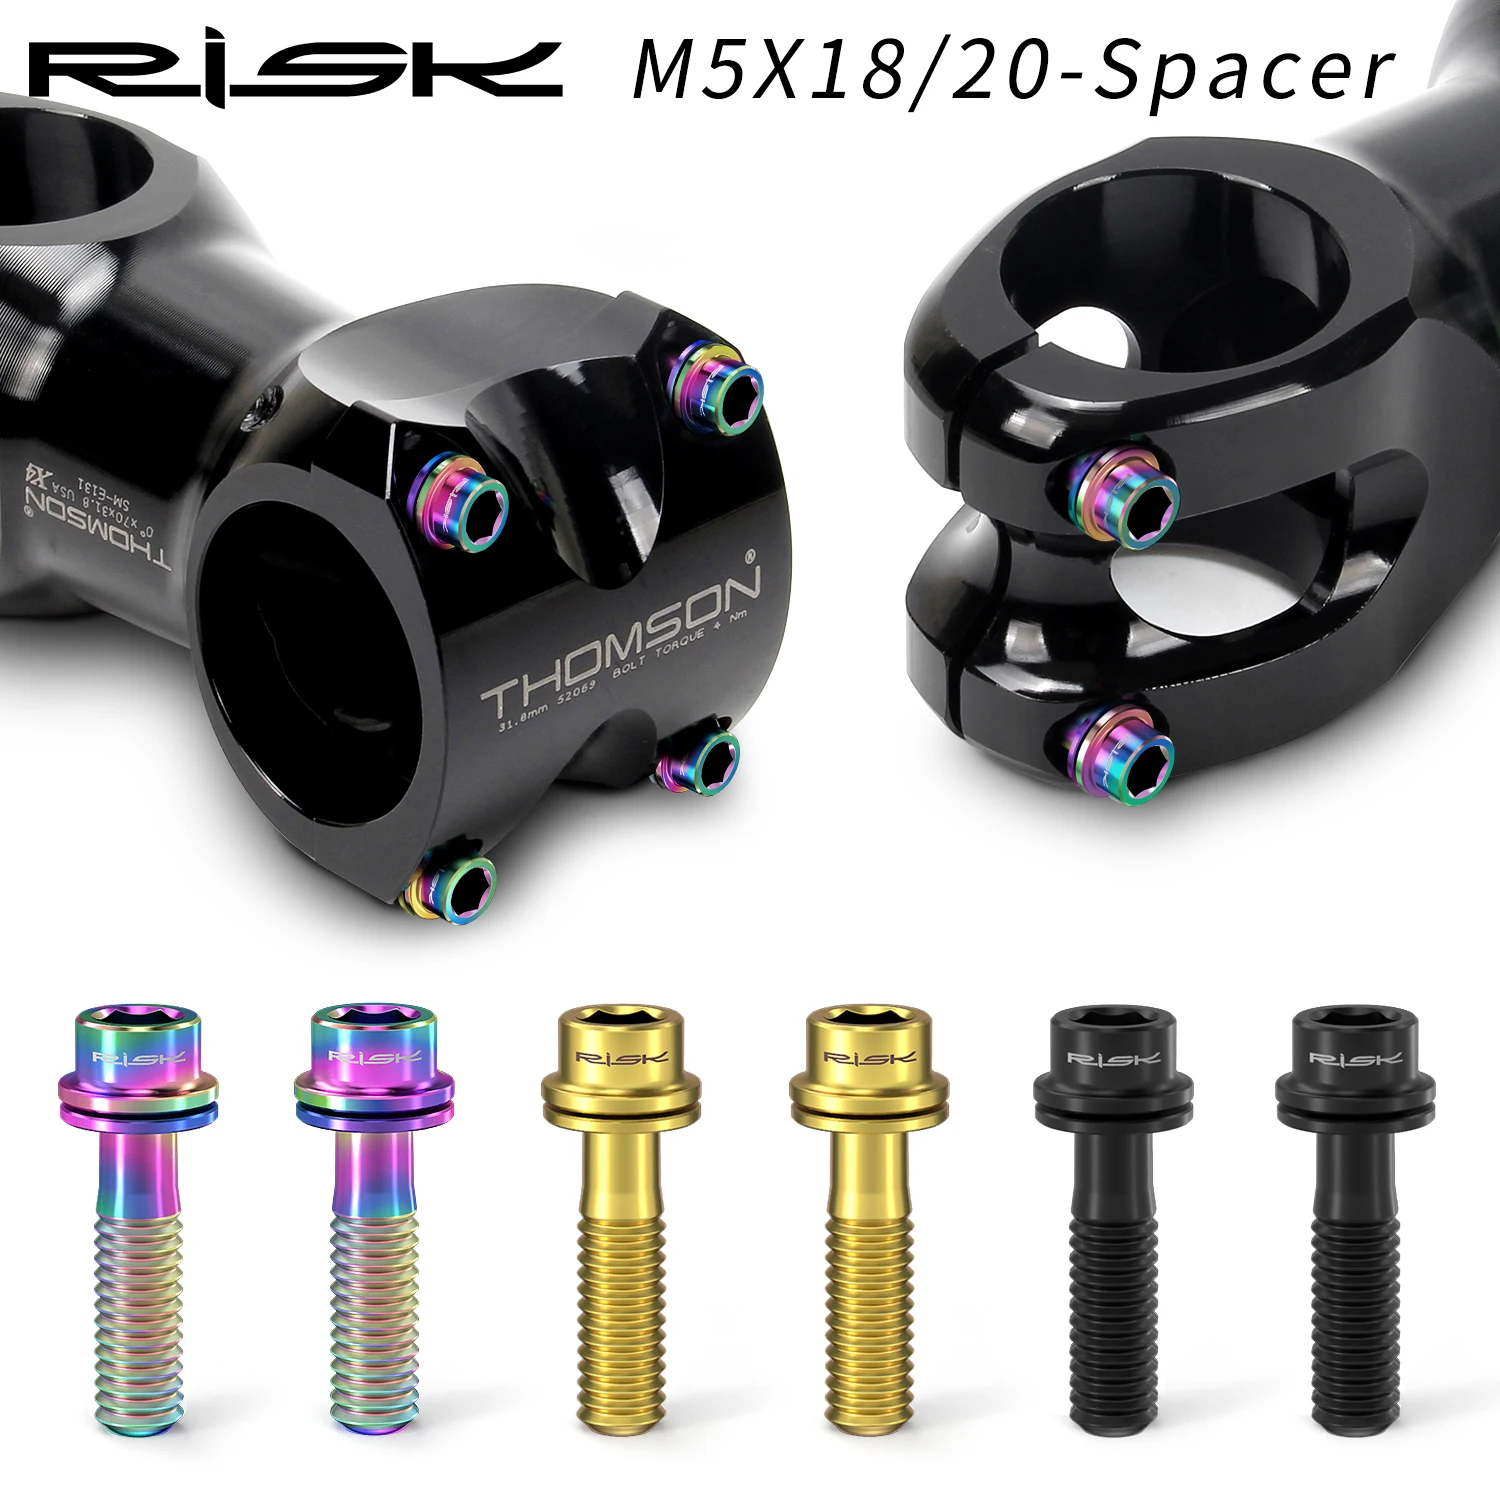 

NEW Design RISK 6PCS Titanium Bicycle Stem Bolt with Spacer M5x18mm M5x20mm Screw for MTB Mountain Bike Handlebar and Front Fork